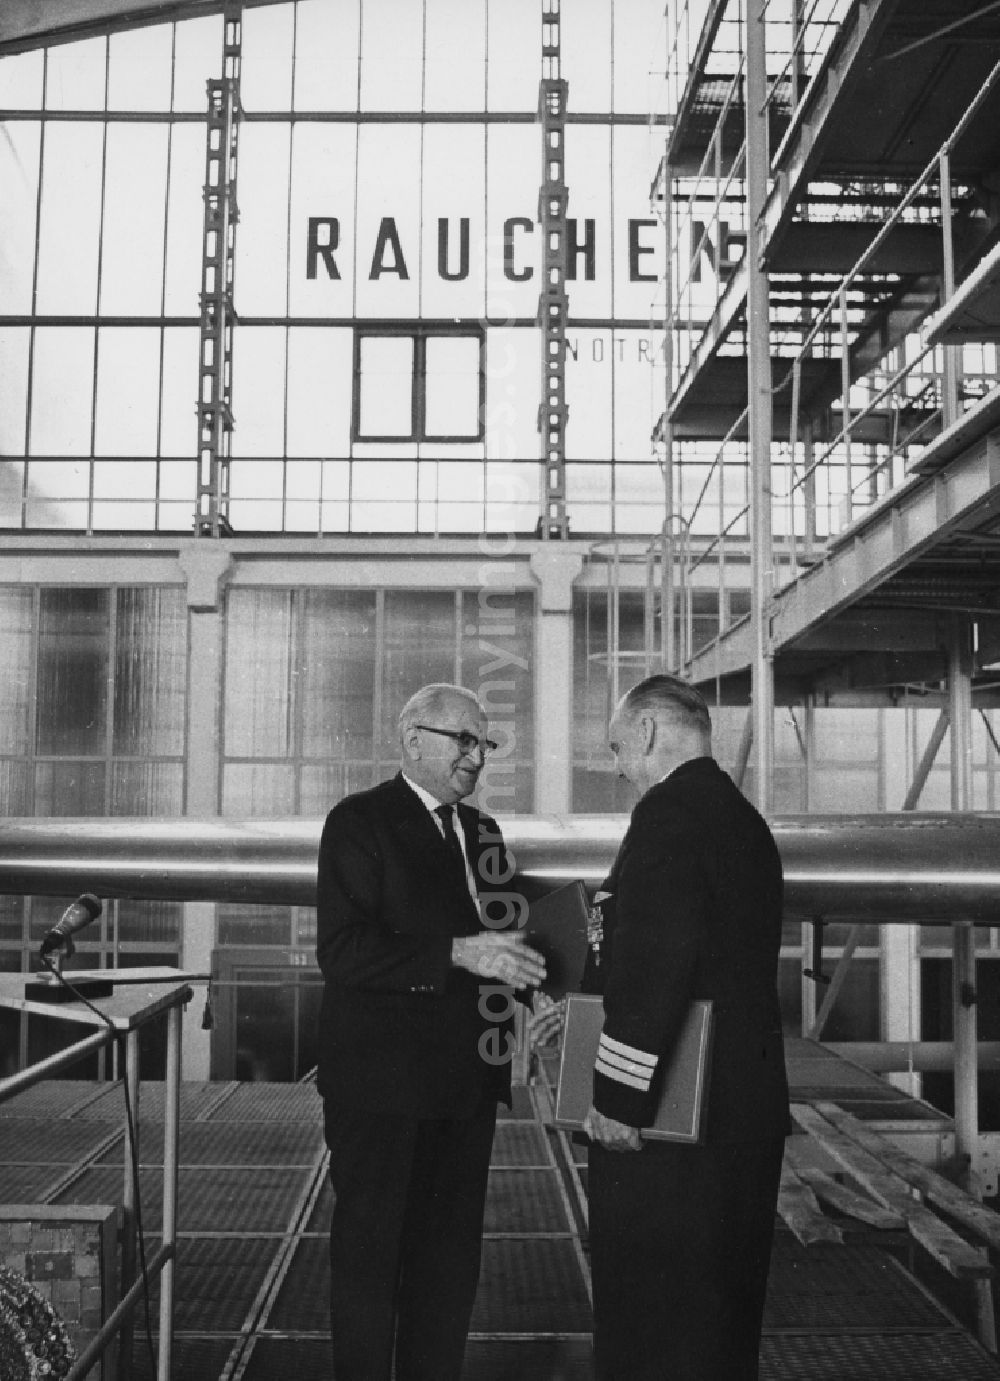 GDR picture archive: Schönefeld - The Principal Director of Deutsche Lufthansa Arthur Pieck in conversation with the Minister of Transport Dr. Erwin Kramer in a hangar at Schoenefeld in what is now the state of Brandenburg